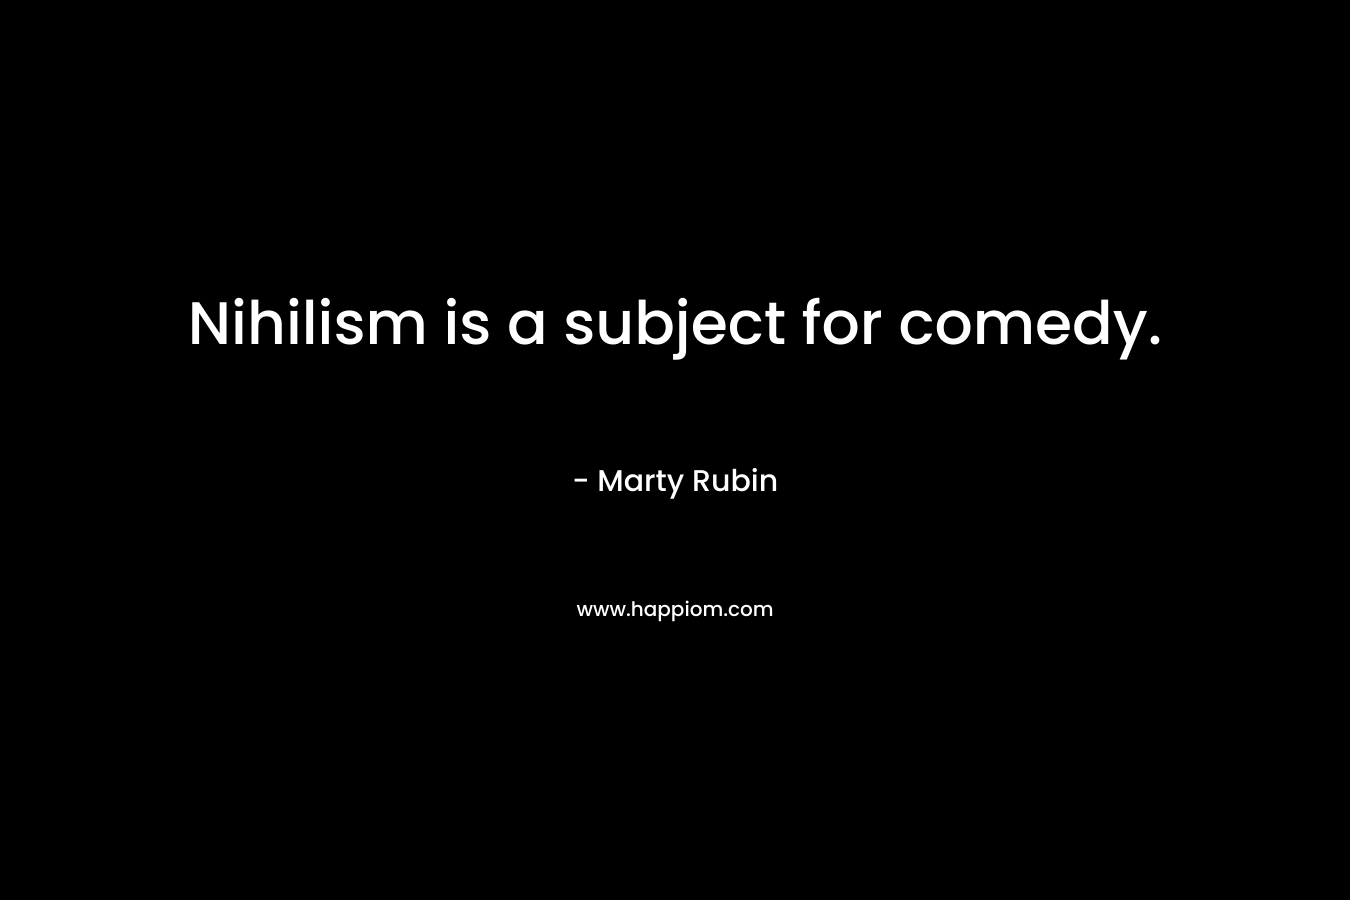 Nihilism is a subject for comedy. – Marty Rubin